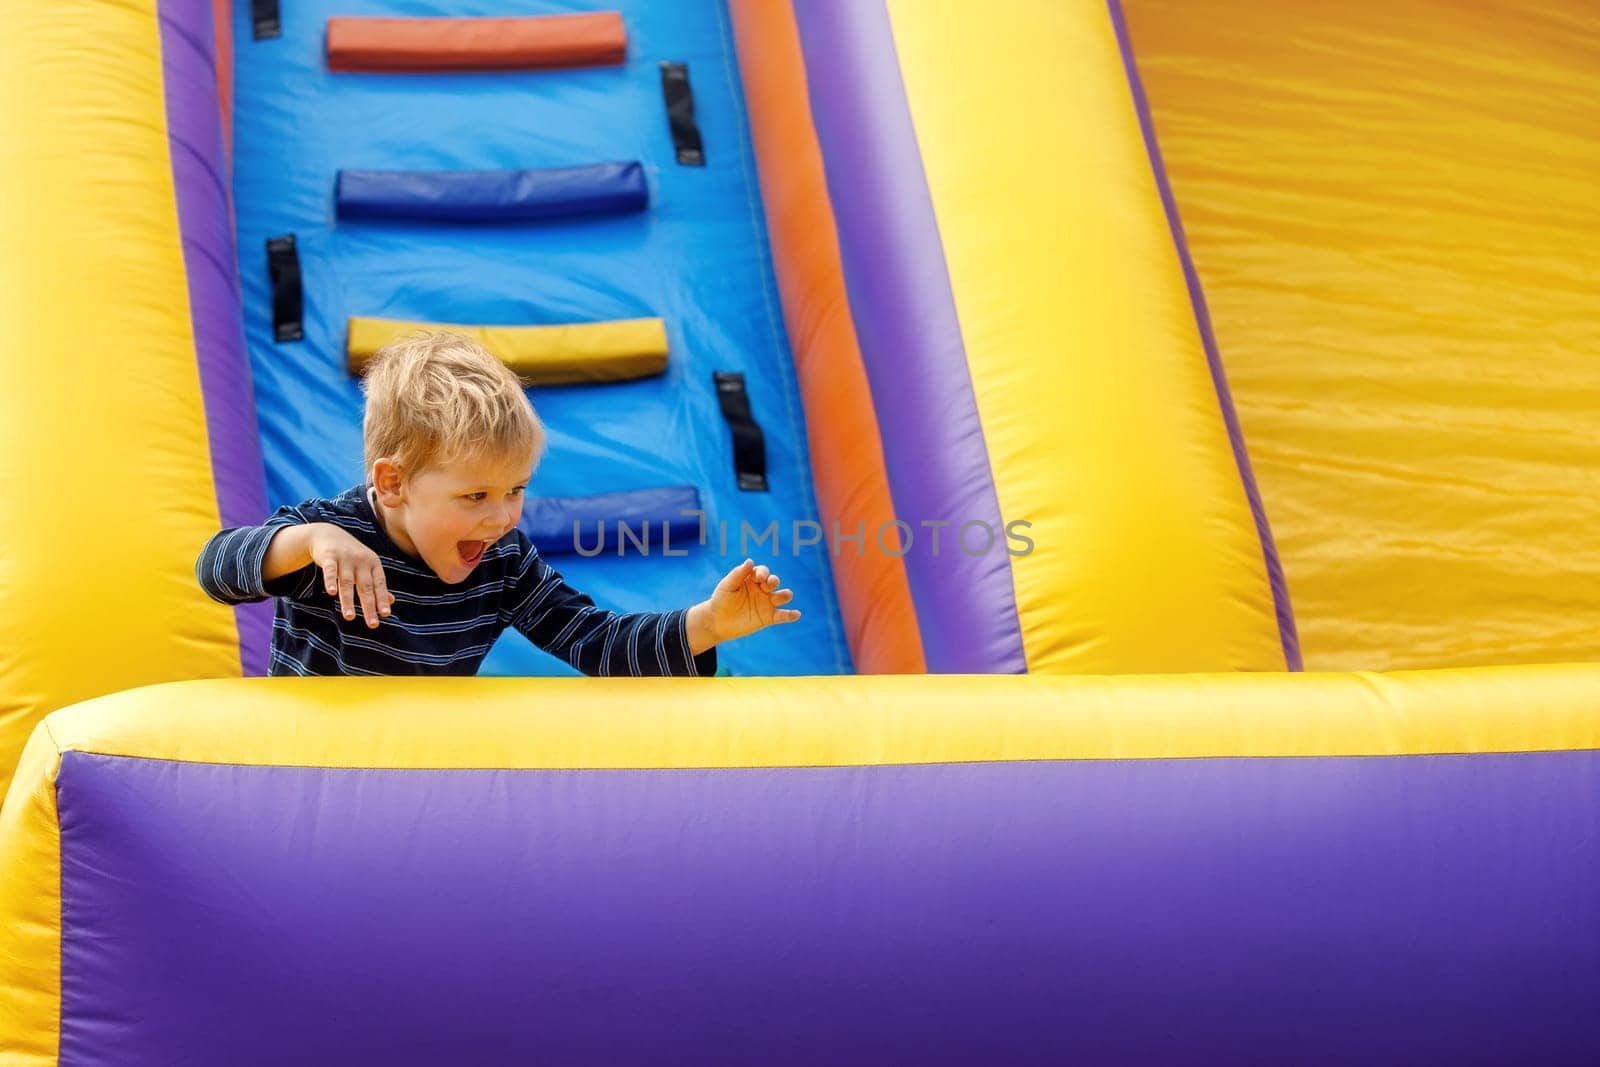 Little boy having fun on inflatable obstacle course. Joyful child naughty, intense raging on colorful inflatable trampoline with ladder. Children's leisure.